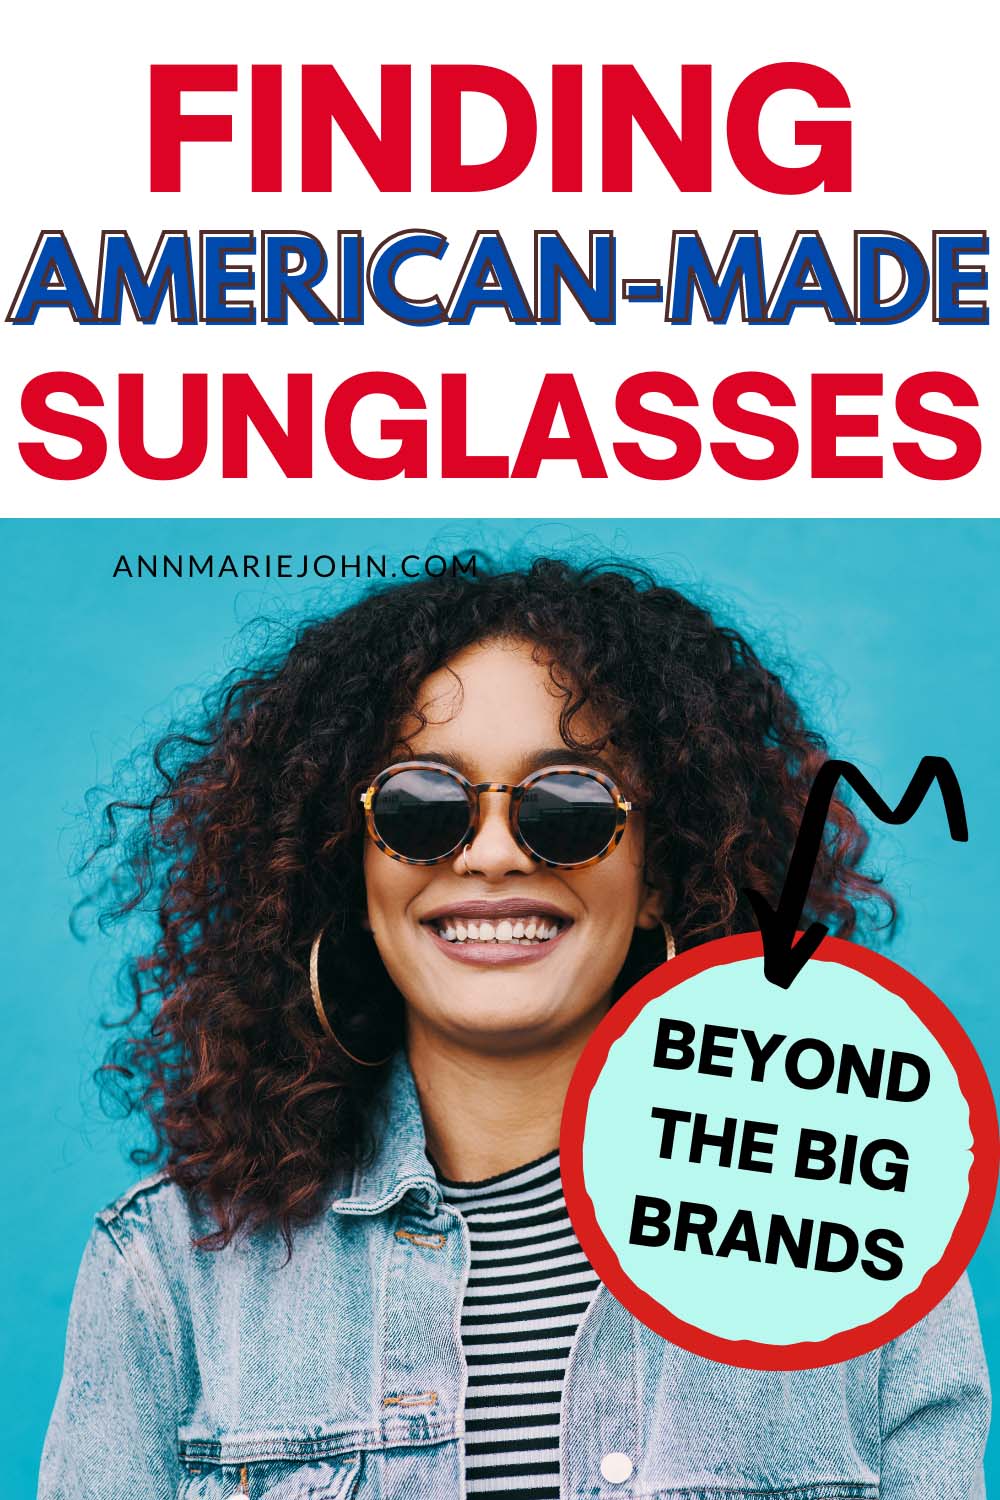 Finding American-Made Sunglasses